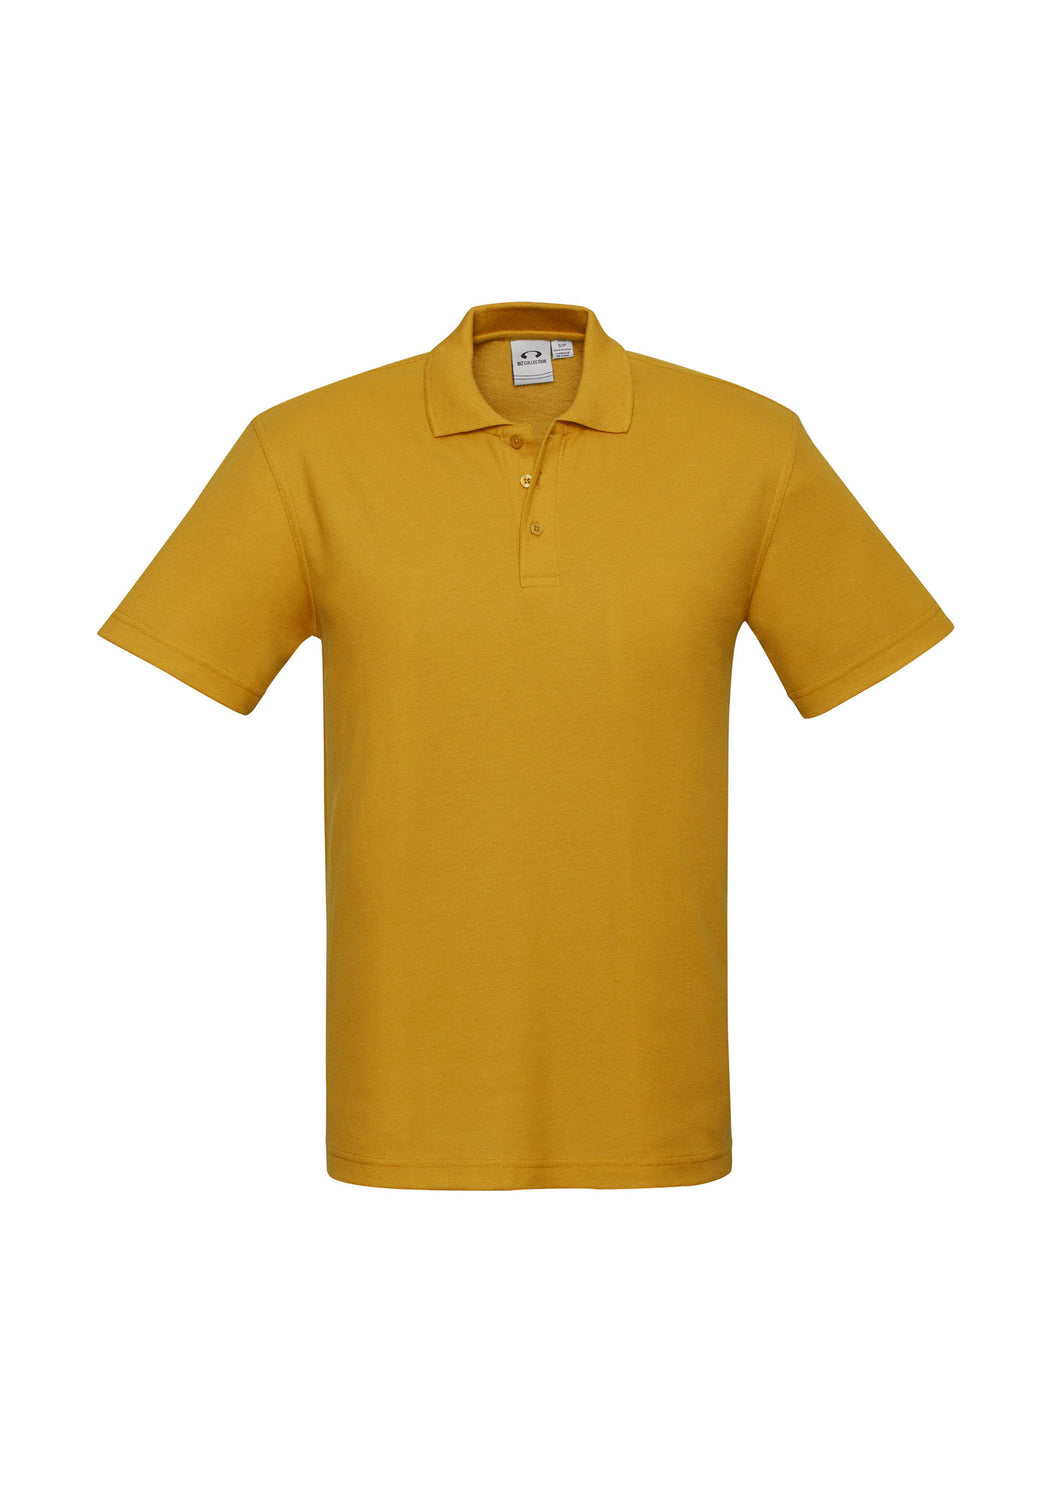 Kids Classic Pique Knit Polo - Gold